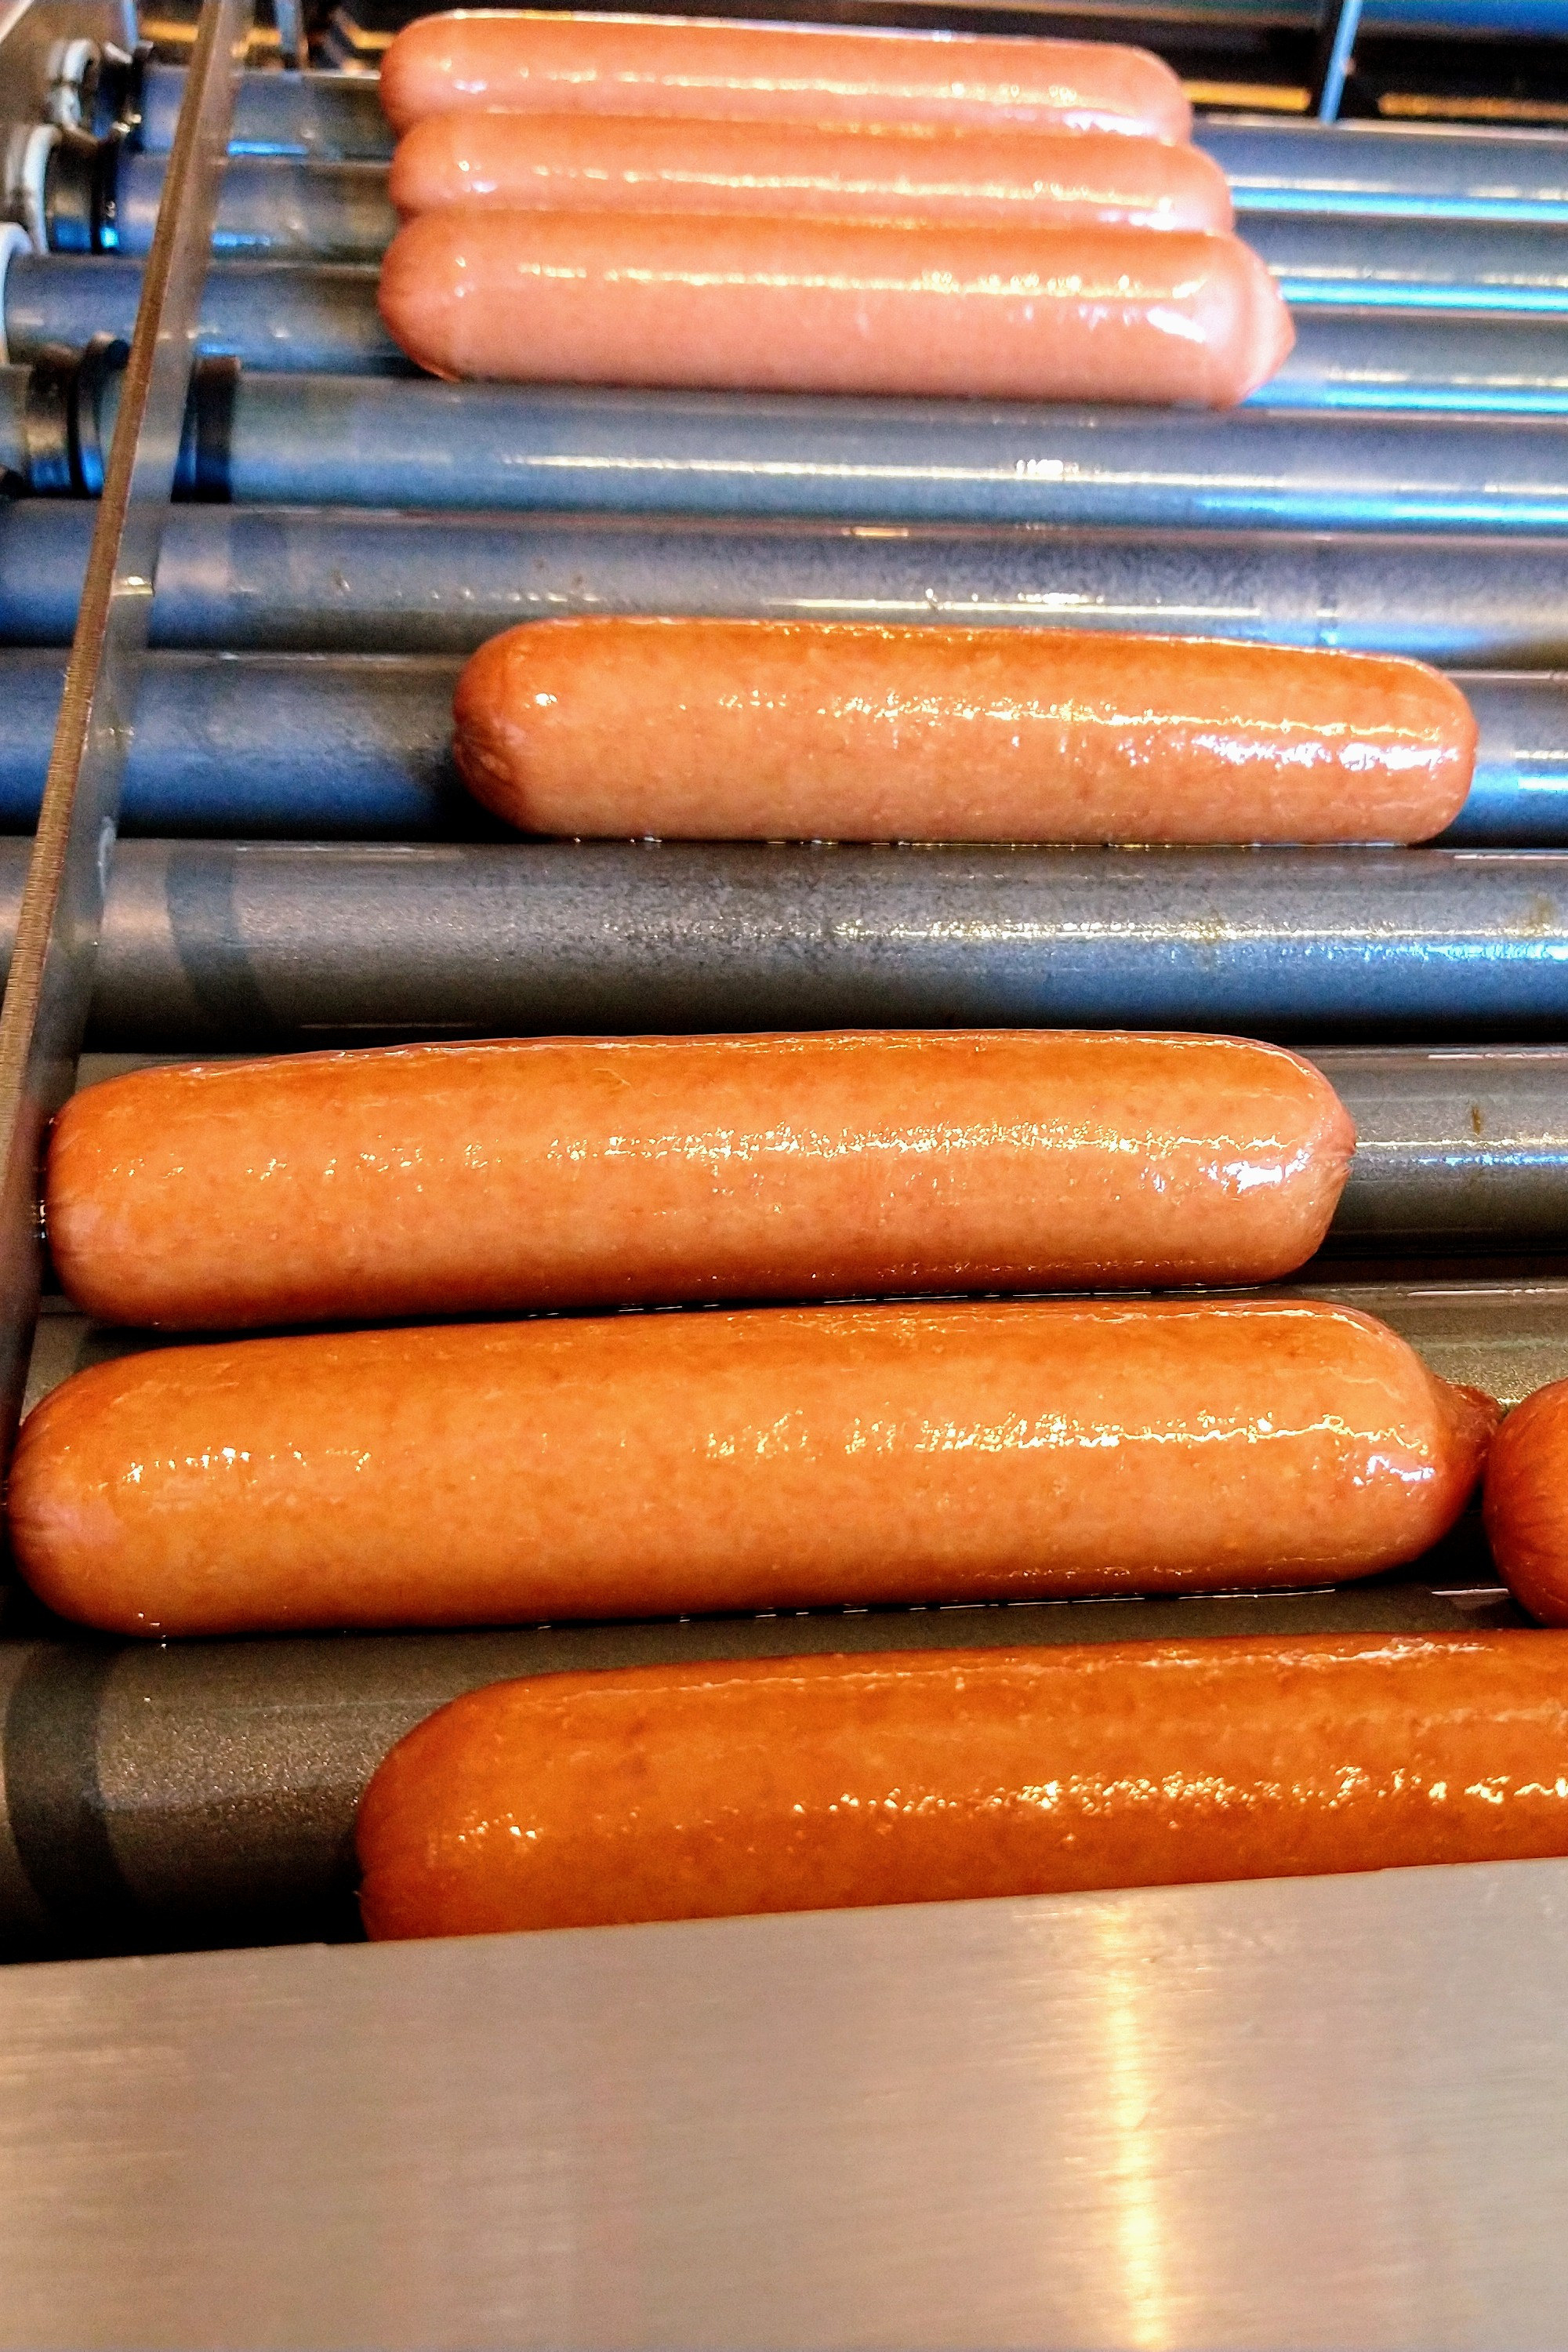 Hot dogs at a gas station.